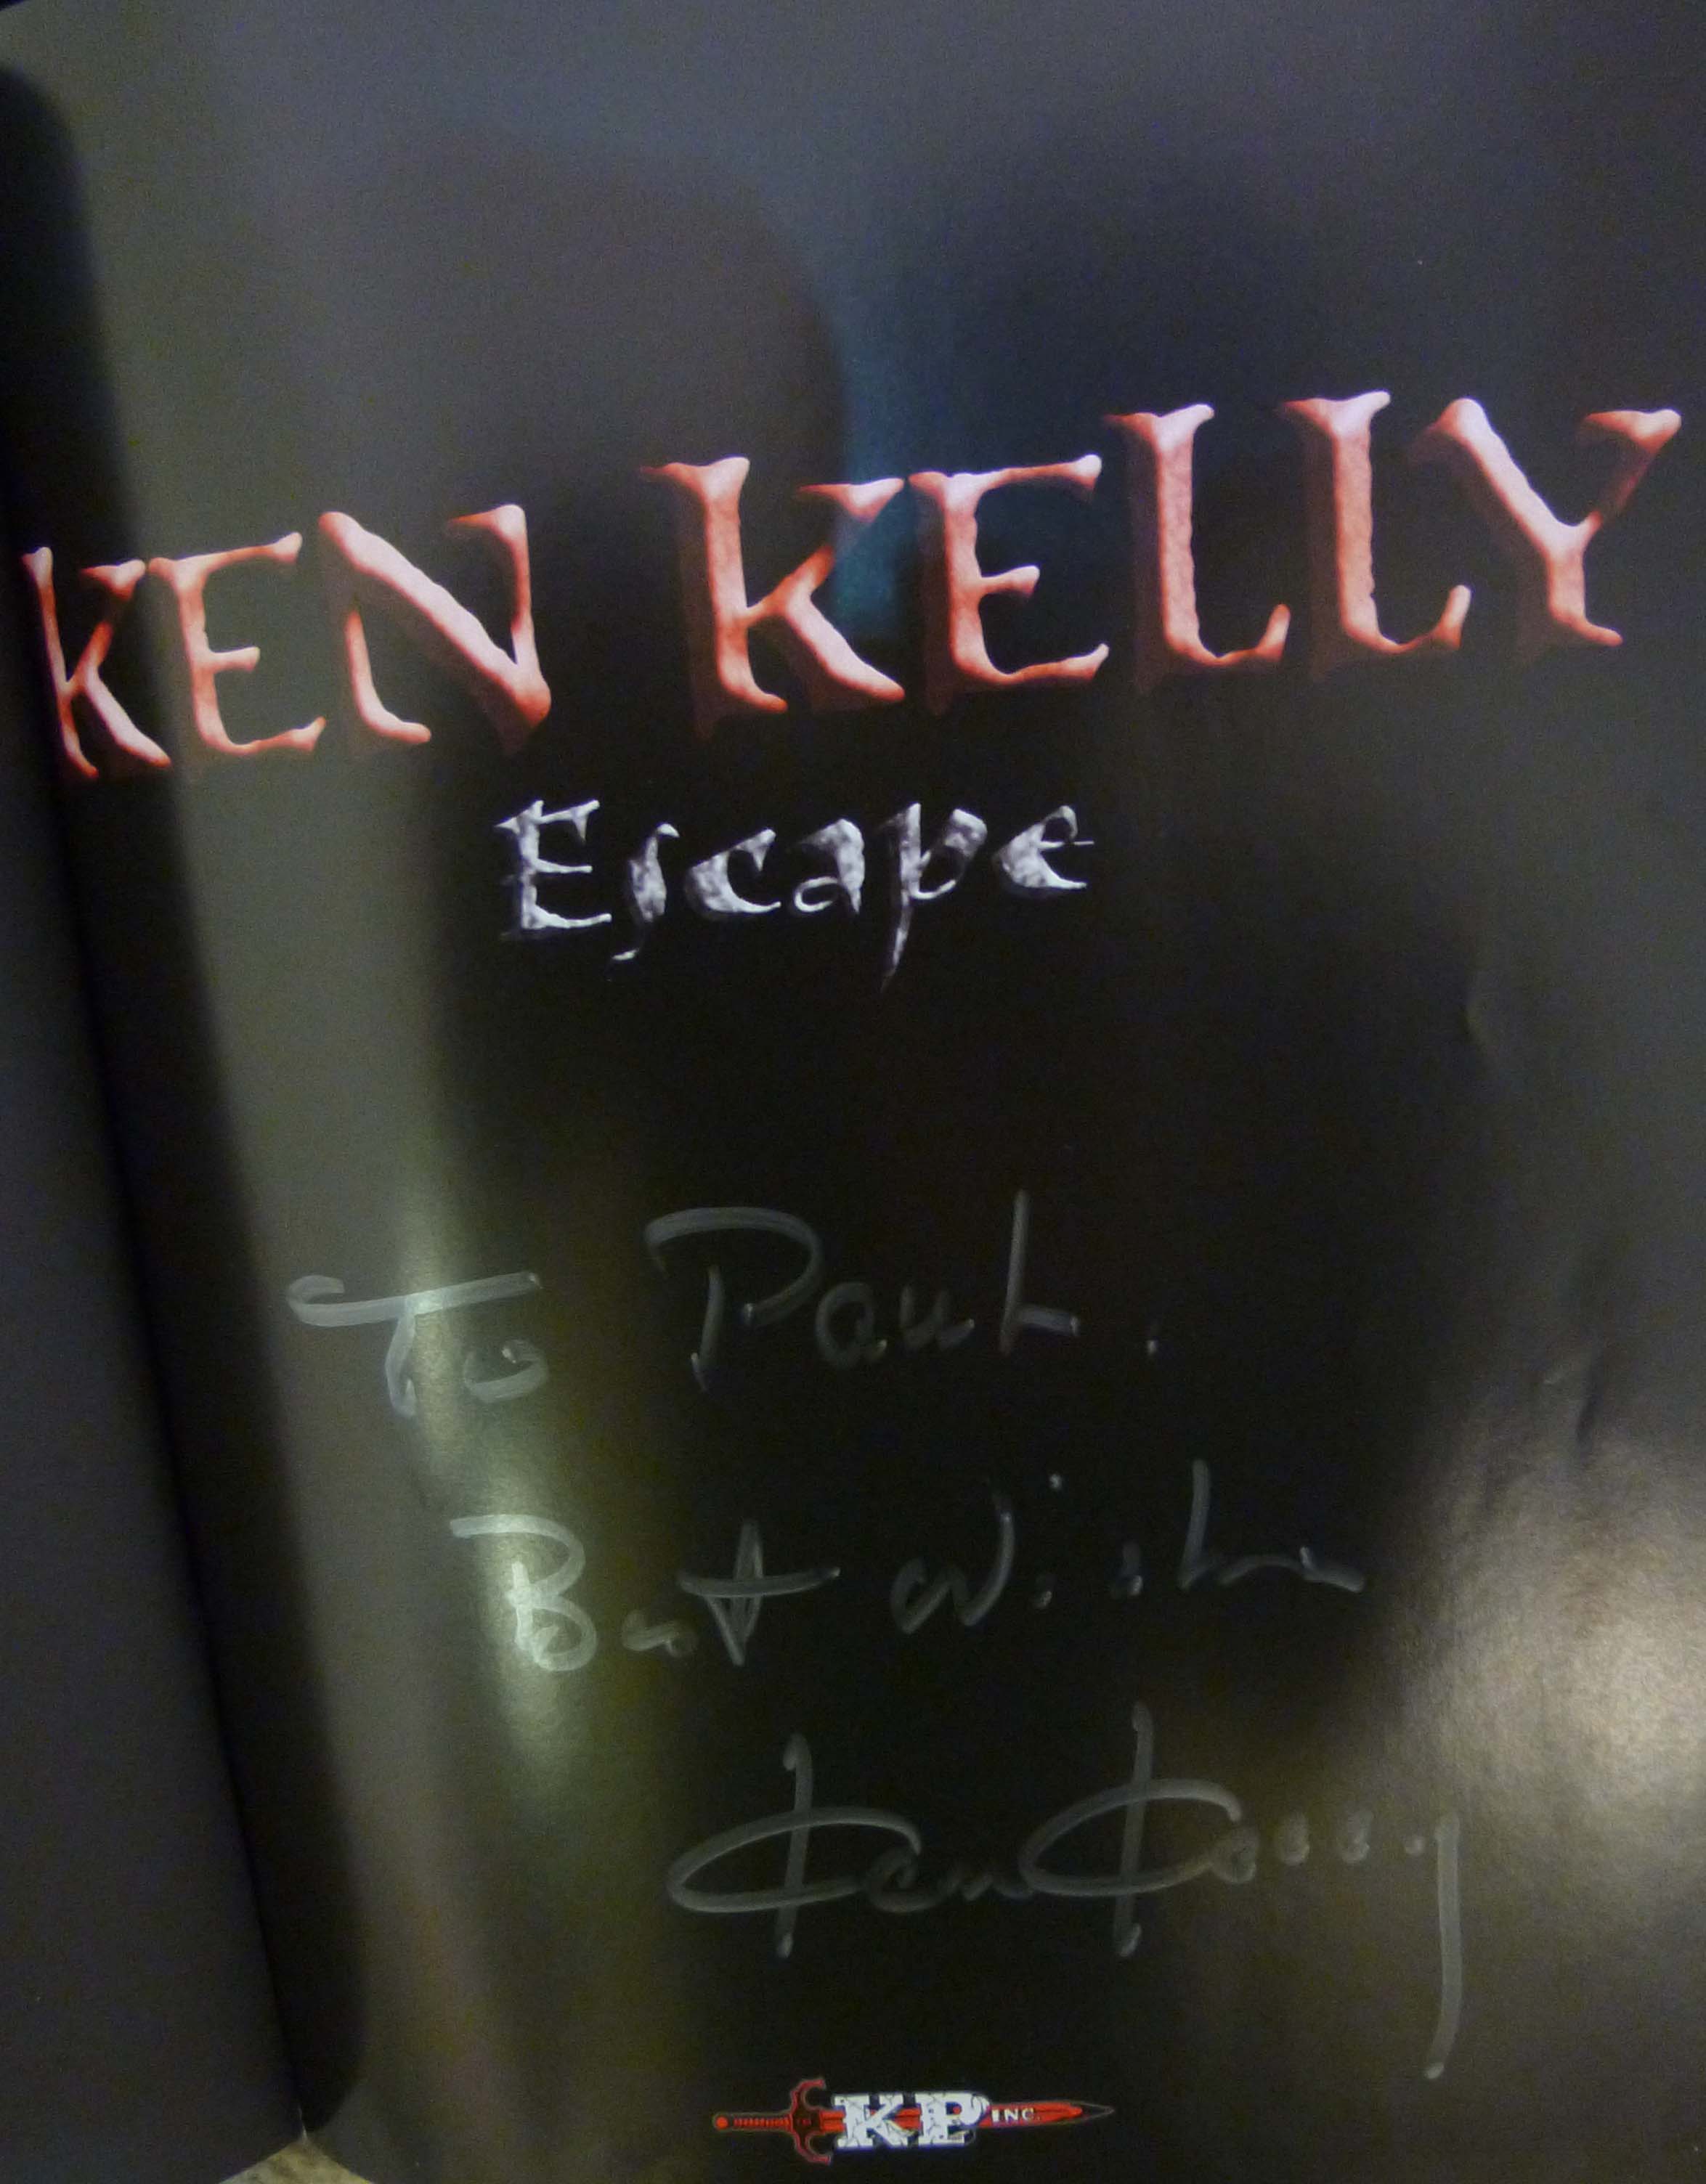 Kelly (Ken) - Escape, with inscription to title page 'To Paul best wishes Ken Kelly', published by